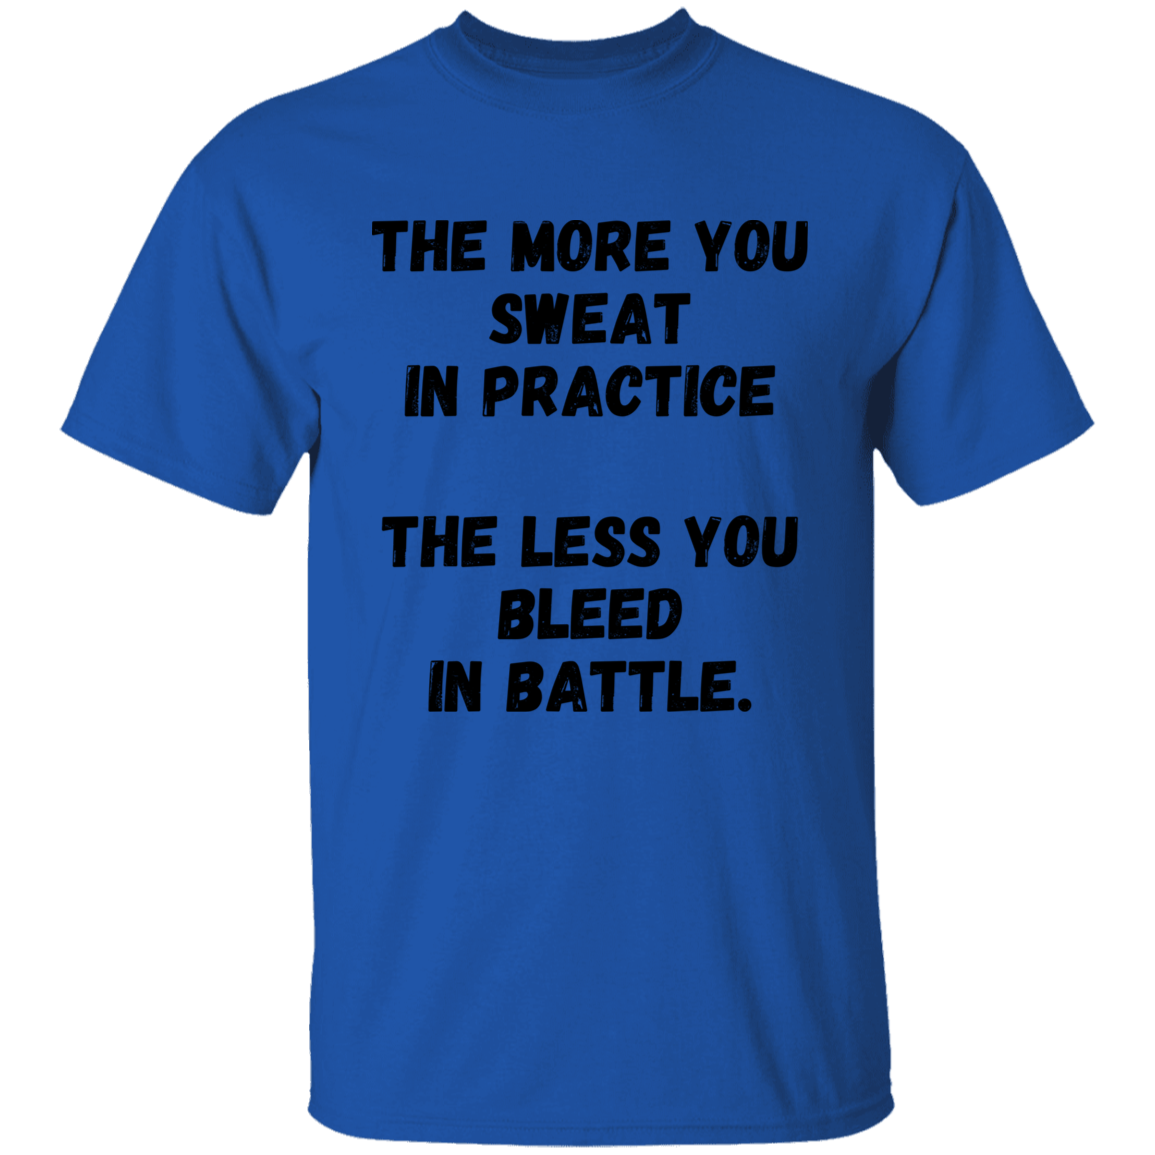 The More You Sweat In Practice, The Less You Bleed In Battle - Boy's, Teen, Youth T-Shirt